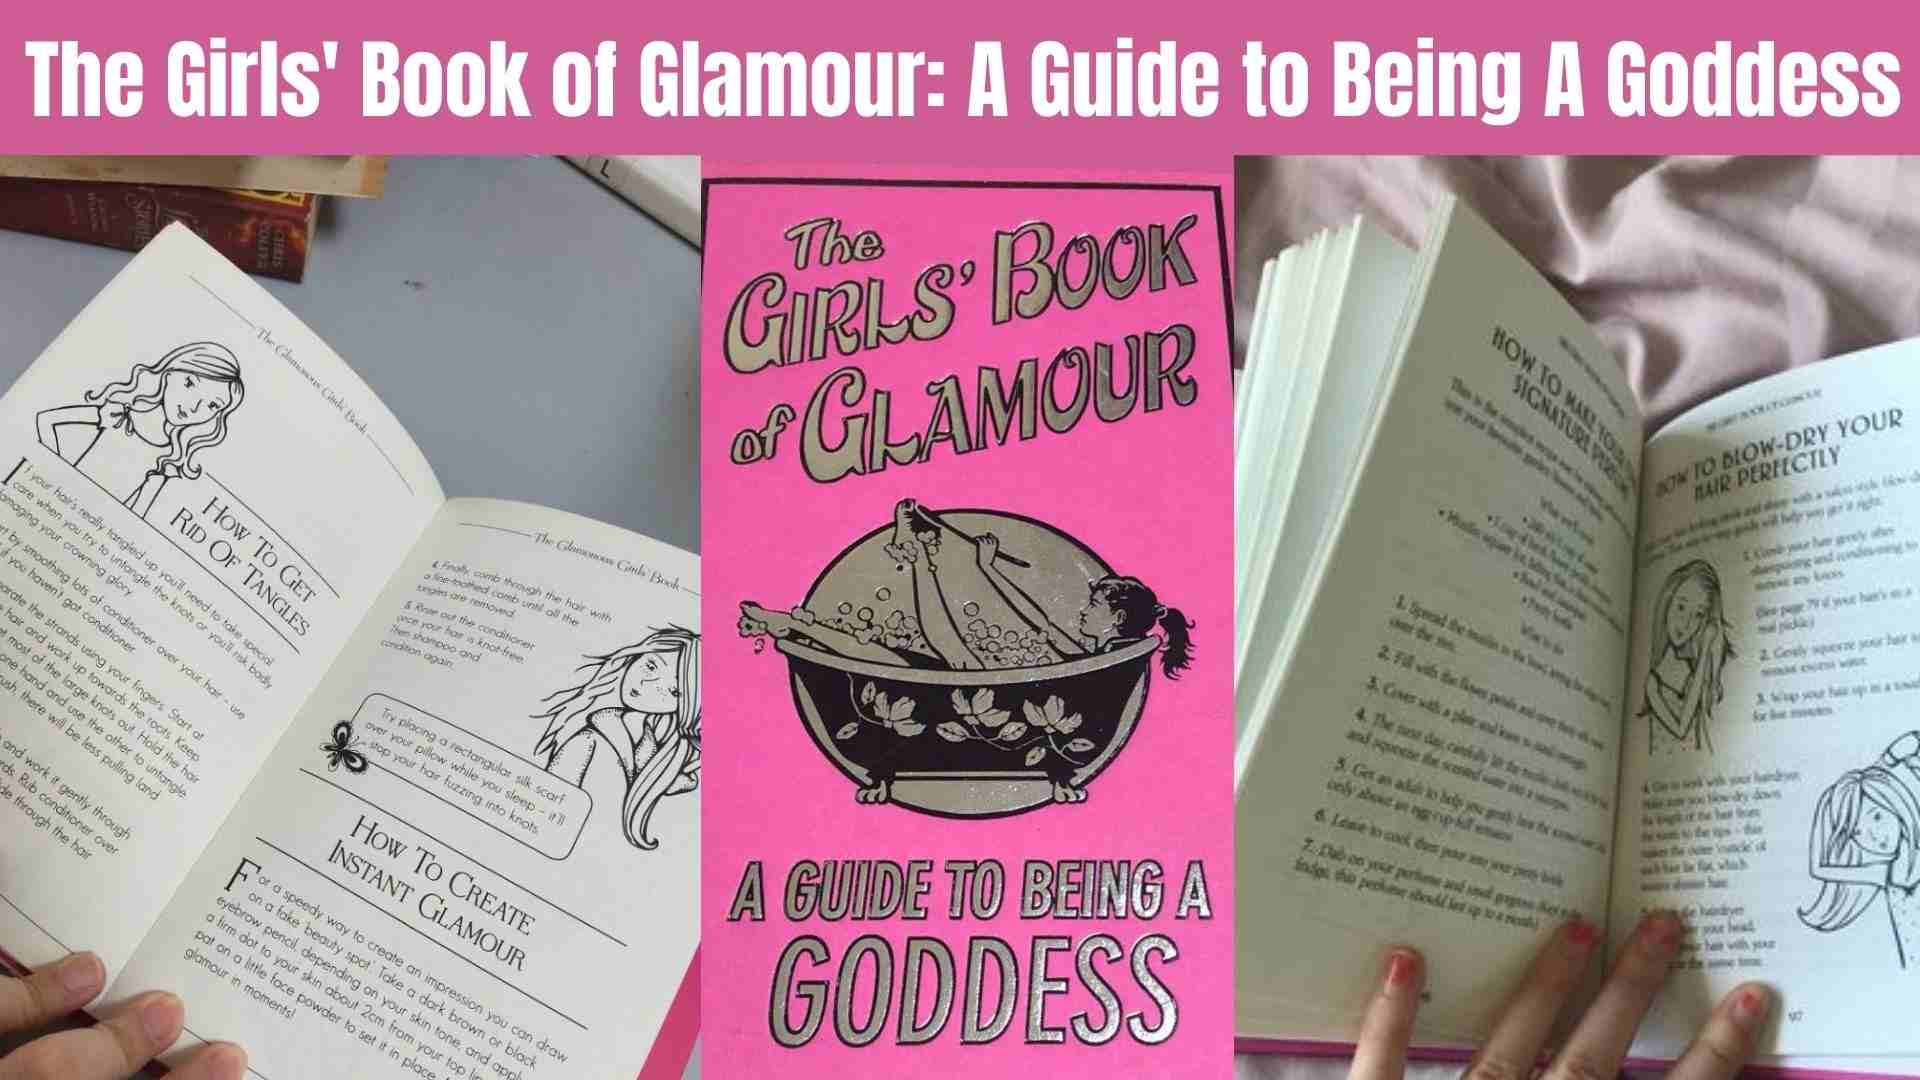 The Girls' Book of Glamour: A Guide to Being A Goddess wallpaper and images